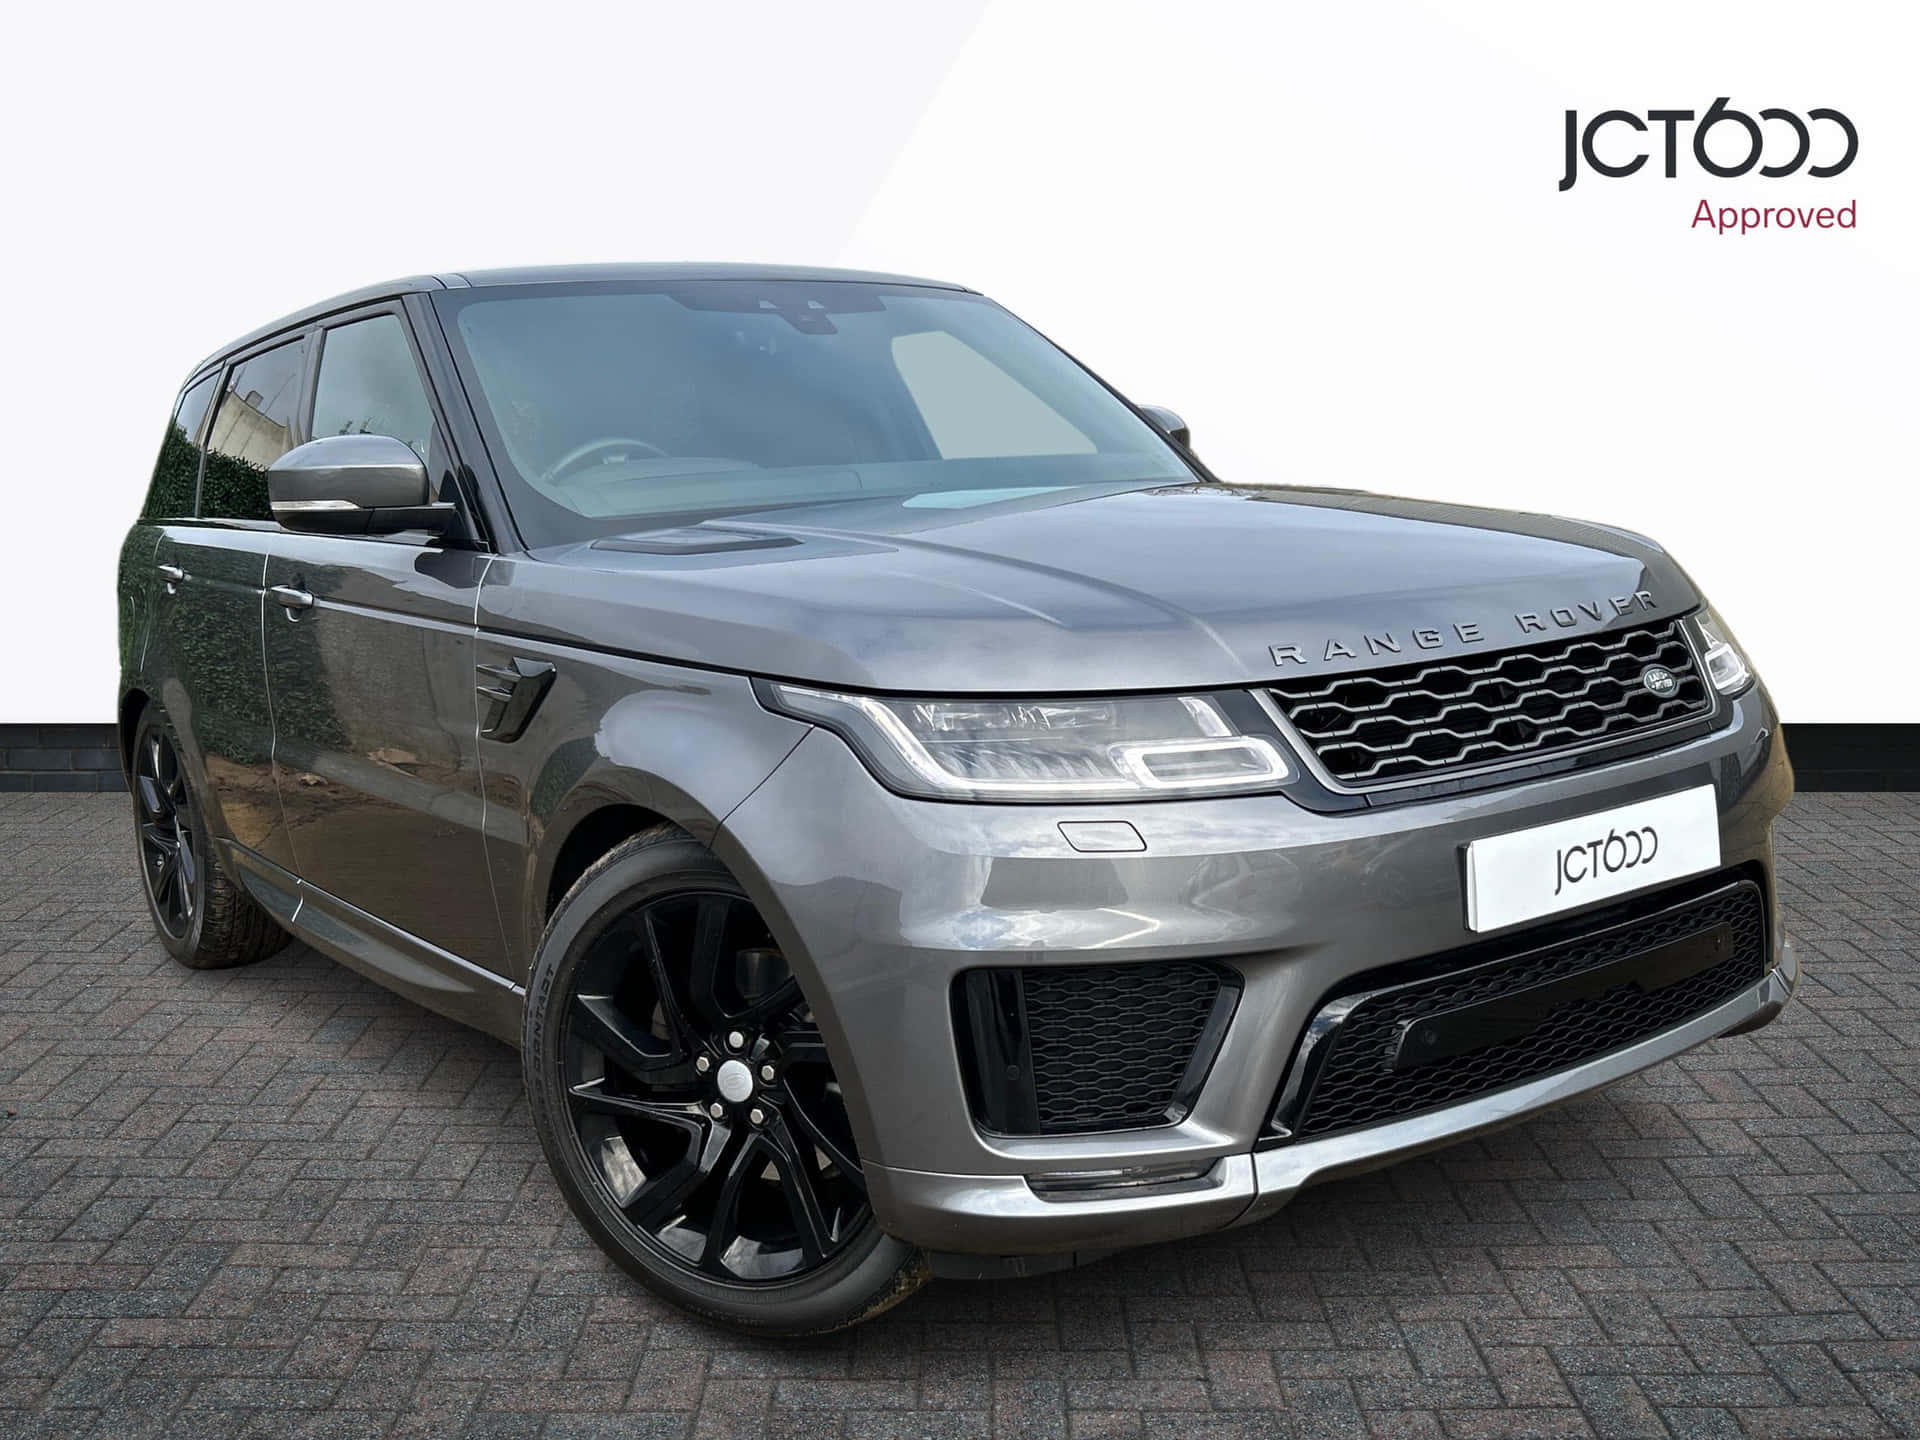 Ride Around in Luxury with a Range Rover